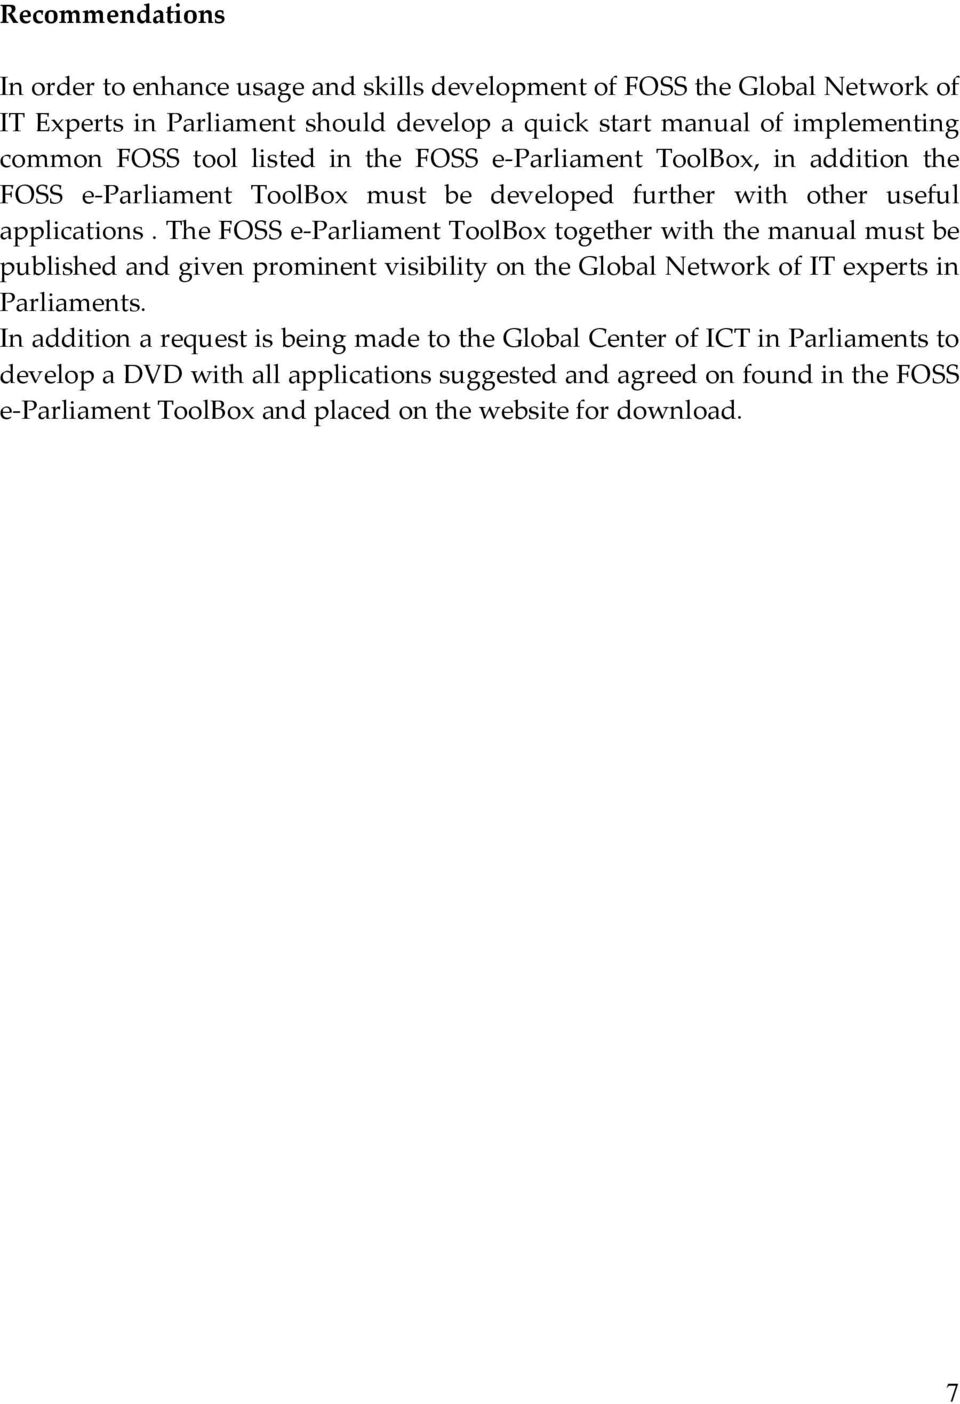 The FOSS e Parliament ToolBox together with the manual must be published and given prominent visibility on the Global Network of IT experts in Parliaments.